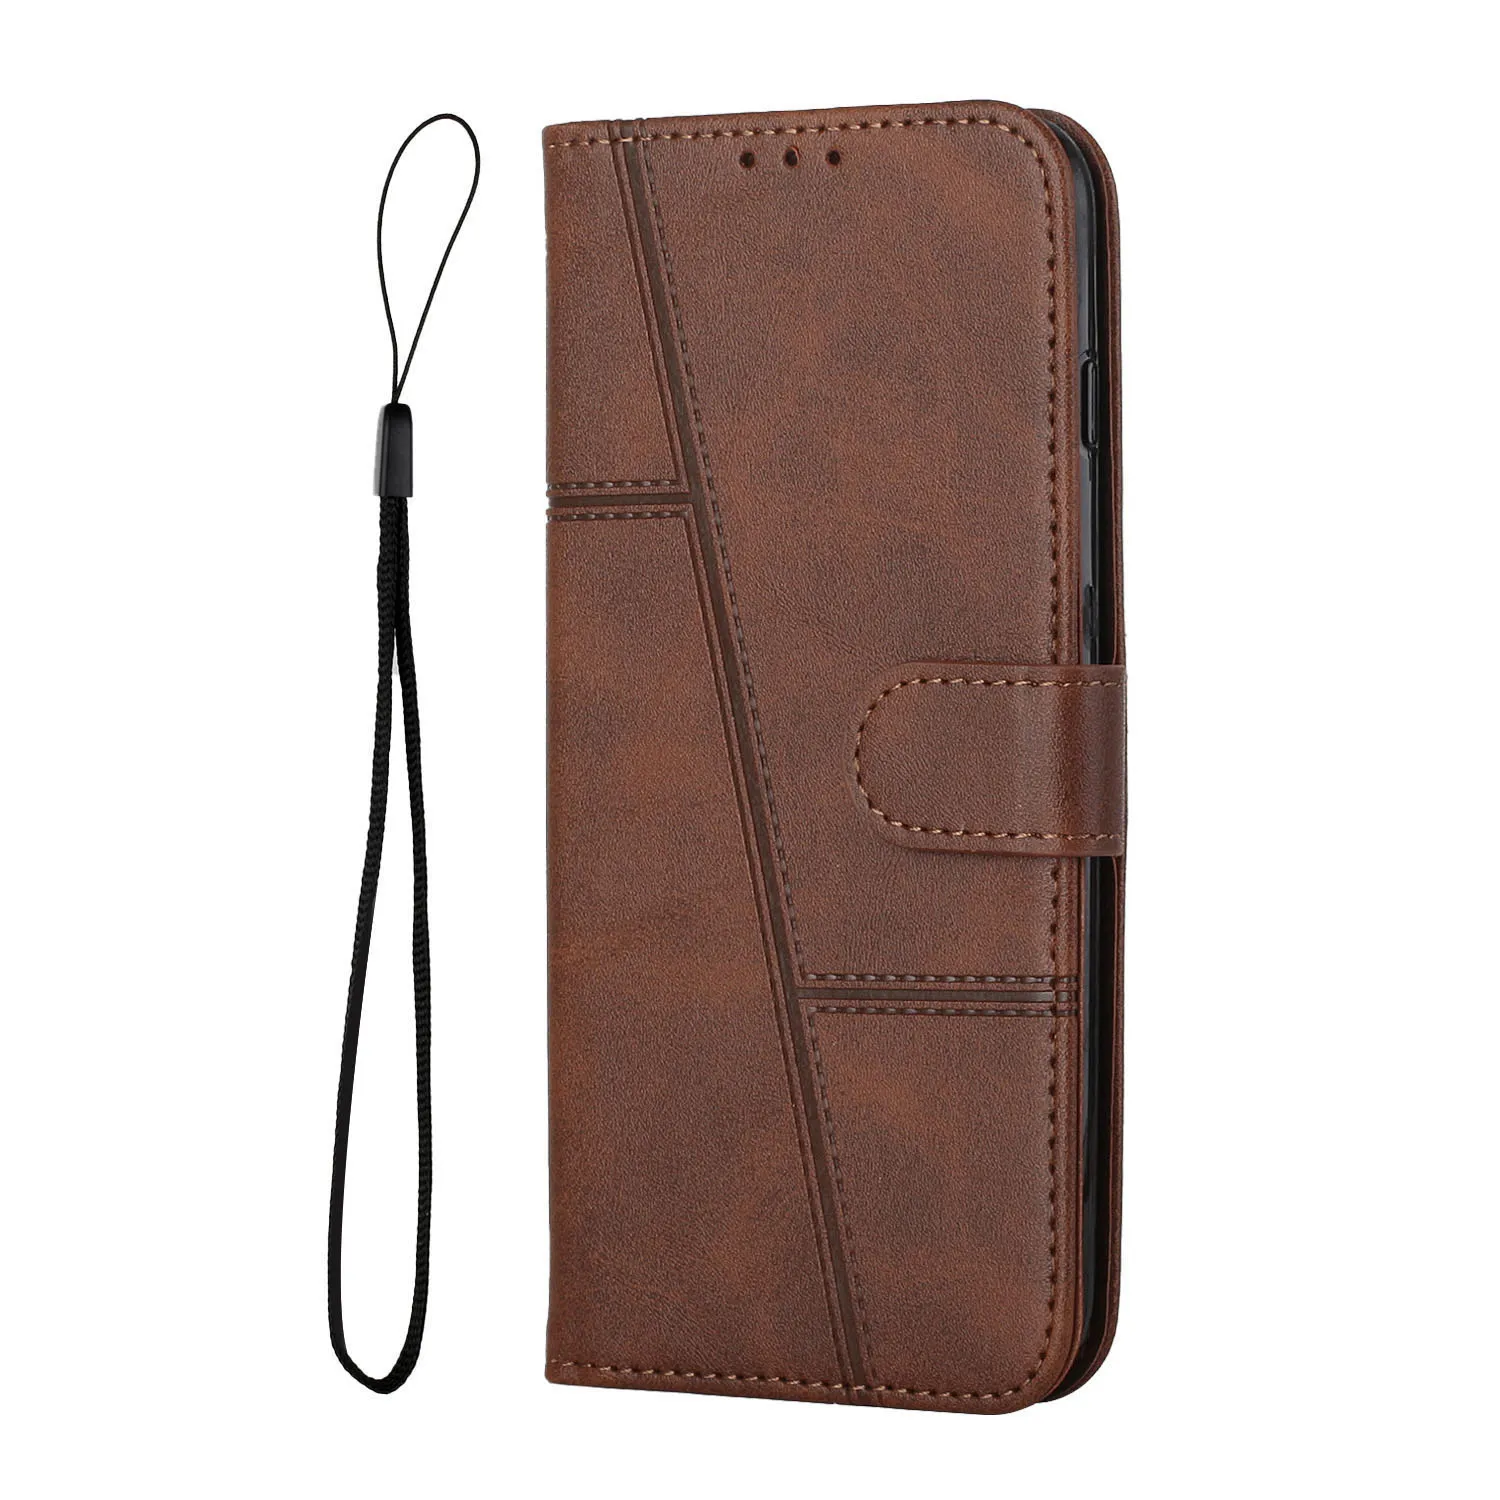 mobile phone pouch Card Holder Wallet Flip Case For Samsung Galaxy S22 S21 S20 A12 A22 A32 A42 A52 A52S A72 A13 A33 A53 A73 A03 Core Leather Cover iphone pouch with strap Cases & Covers